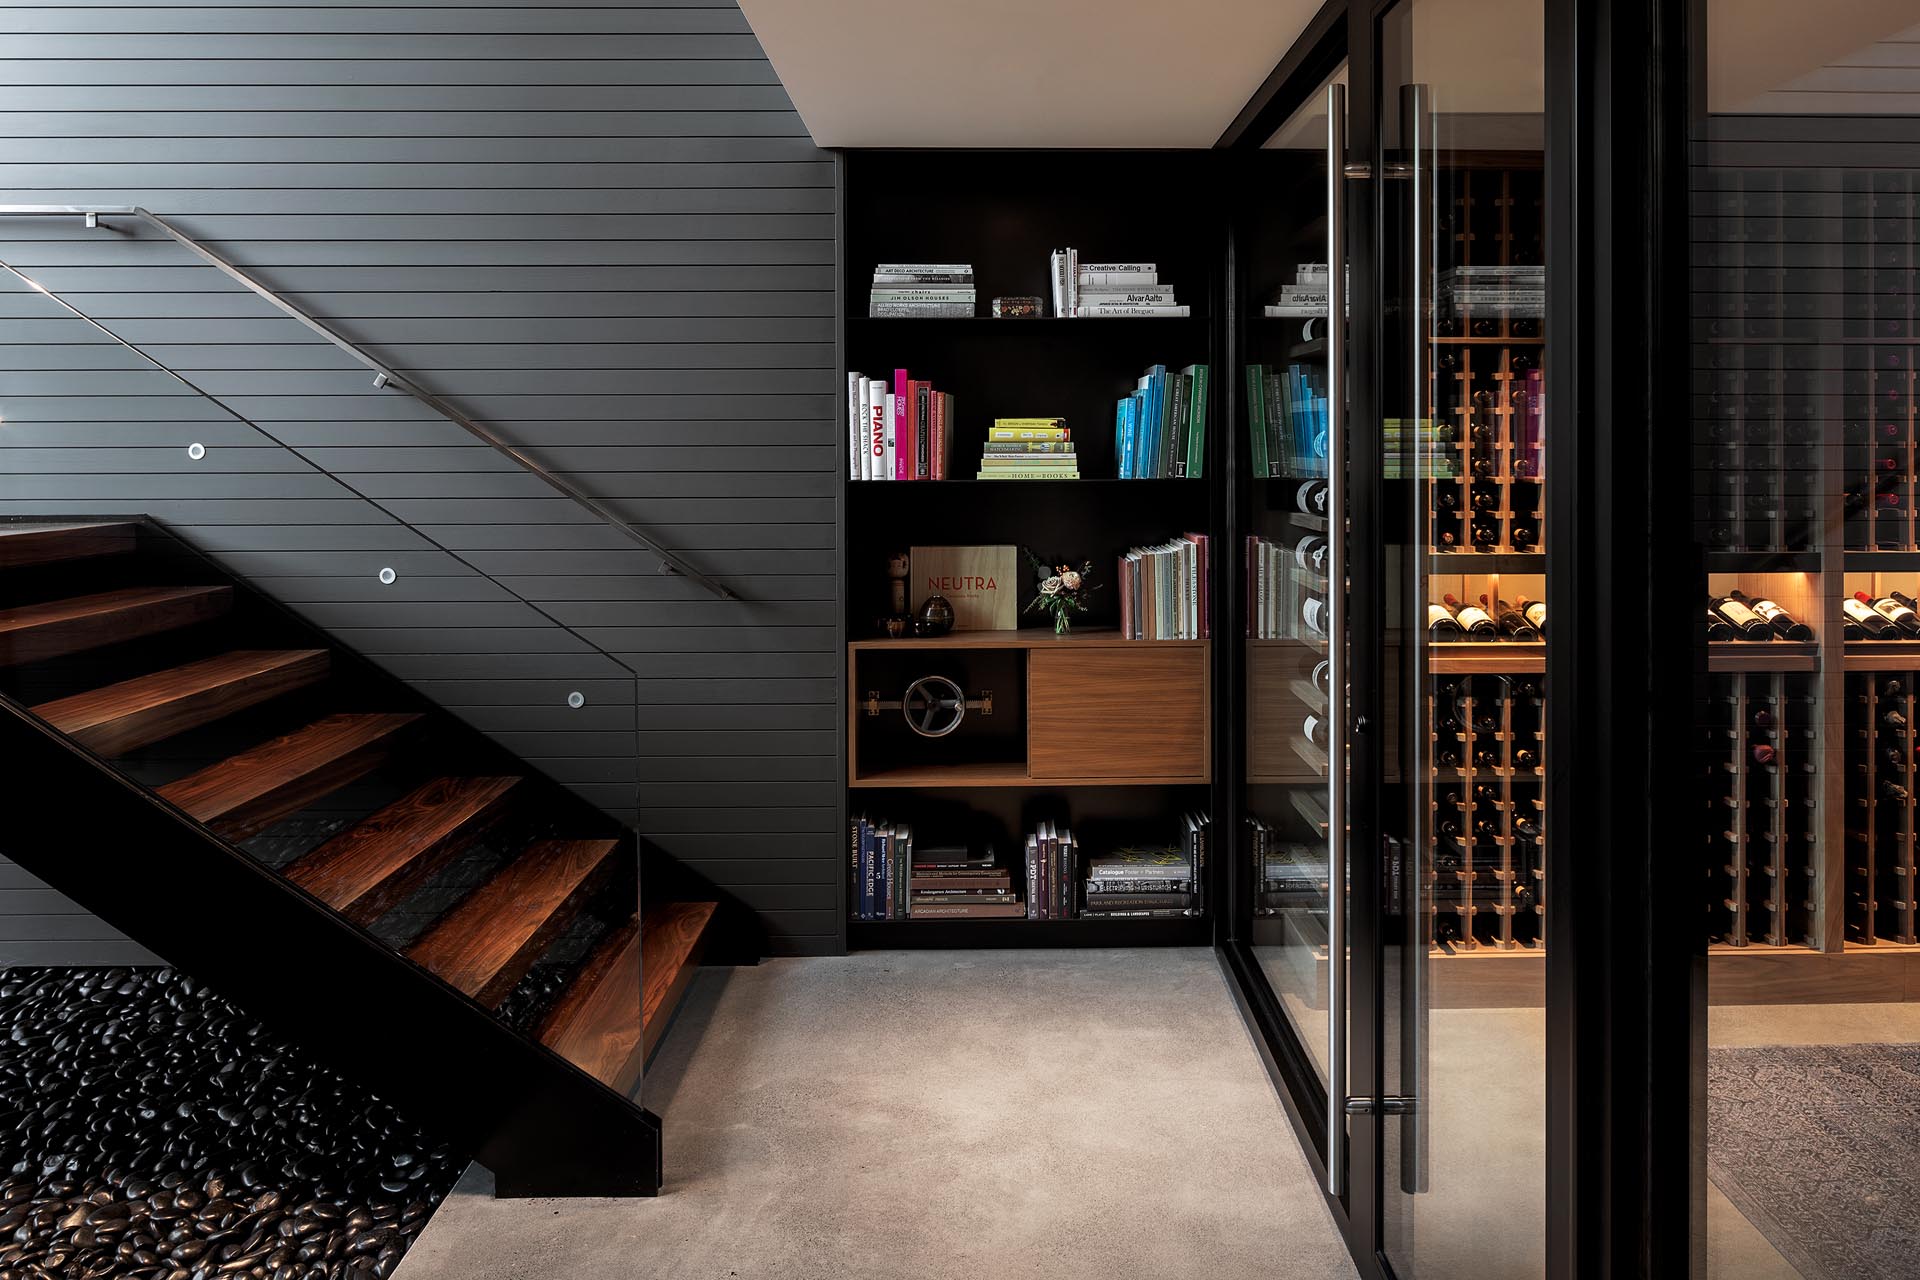 This modern house has a hidden whiskey room - accessed through a secret latch in the bookshelf at the bottom of the stairs.